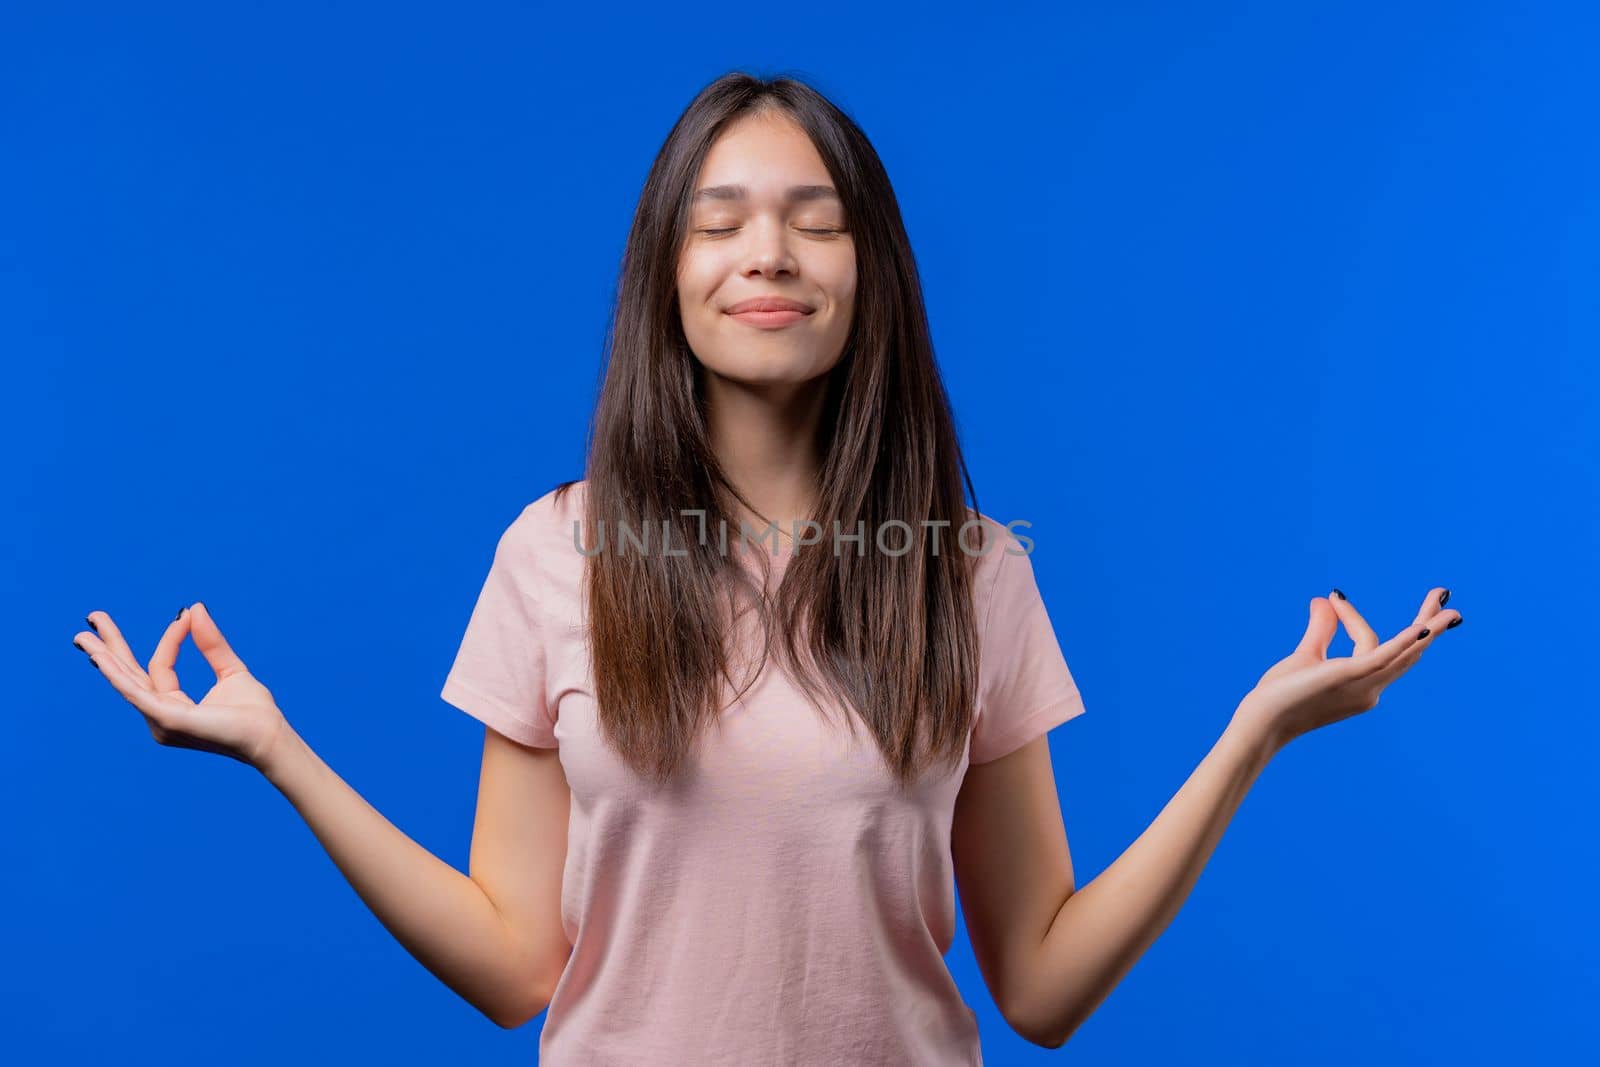 Calm woman relaxing, meditating, refuses stress. Young teen girl breathes deeply, calms down blue studio background. Yoga, moral balance, zen concept. by kristina_kokhanova